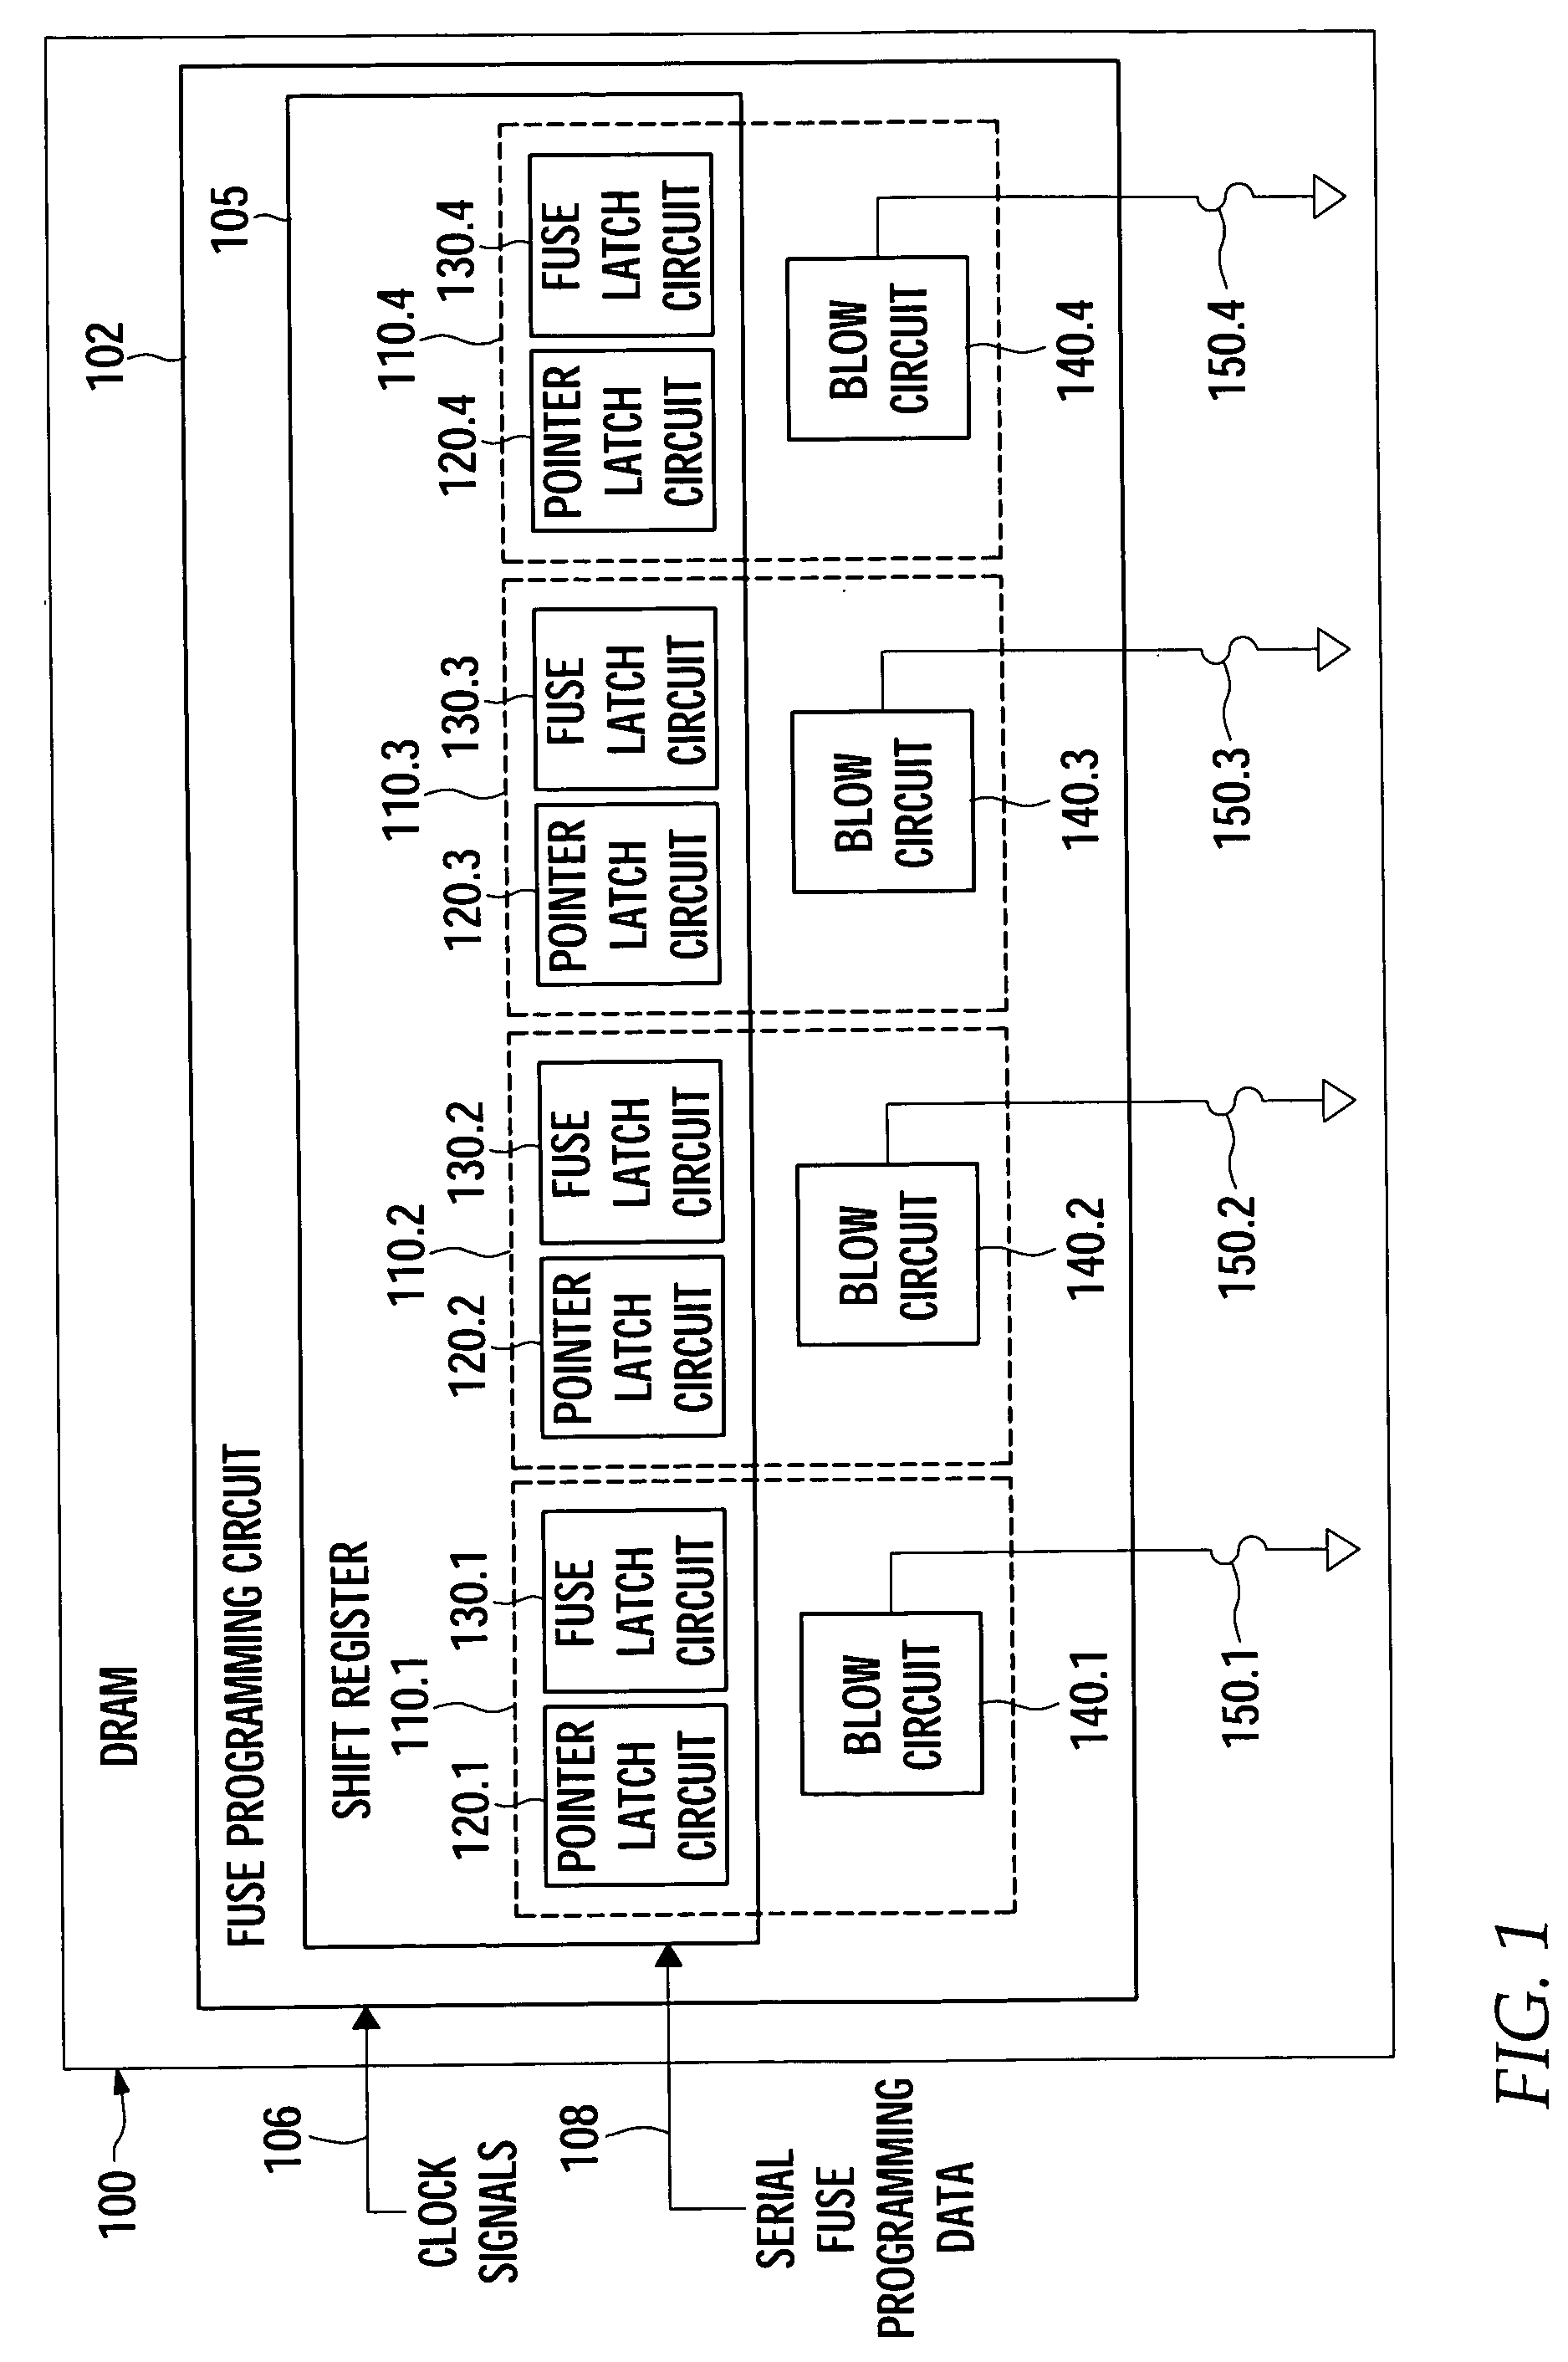 Externally clocked electrical fuse programming with asynchronous fuse selection